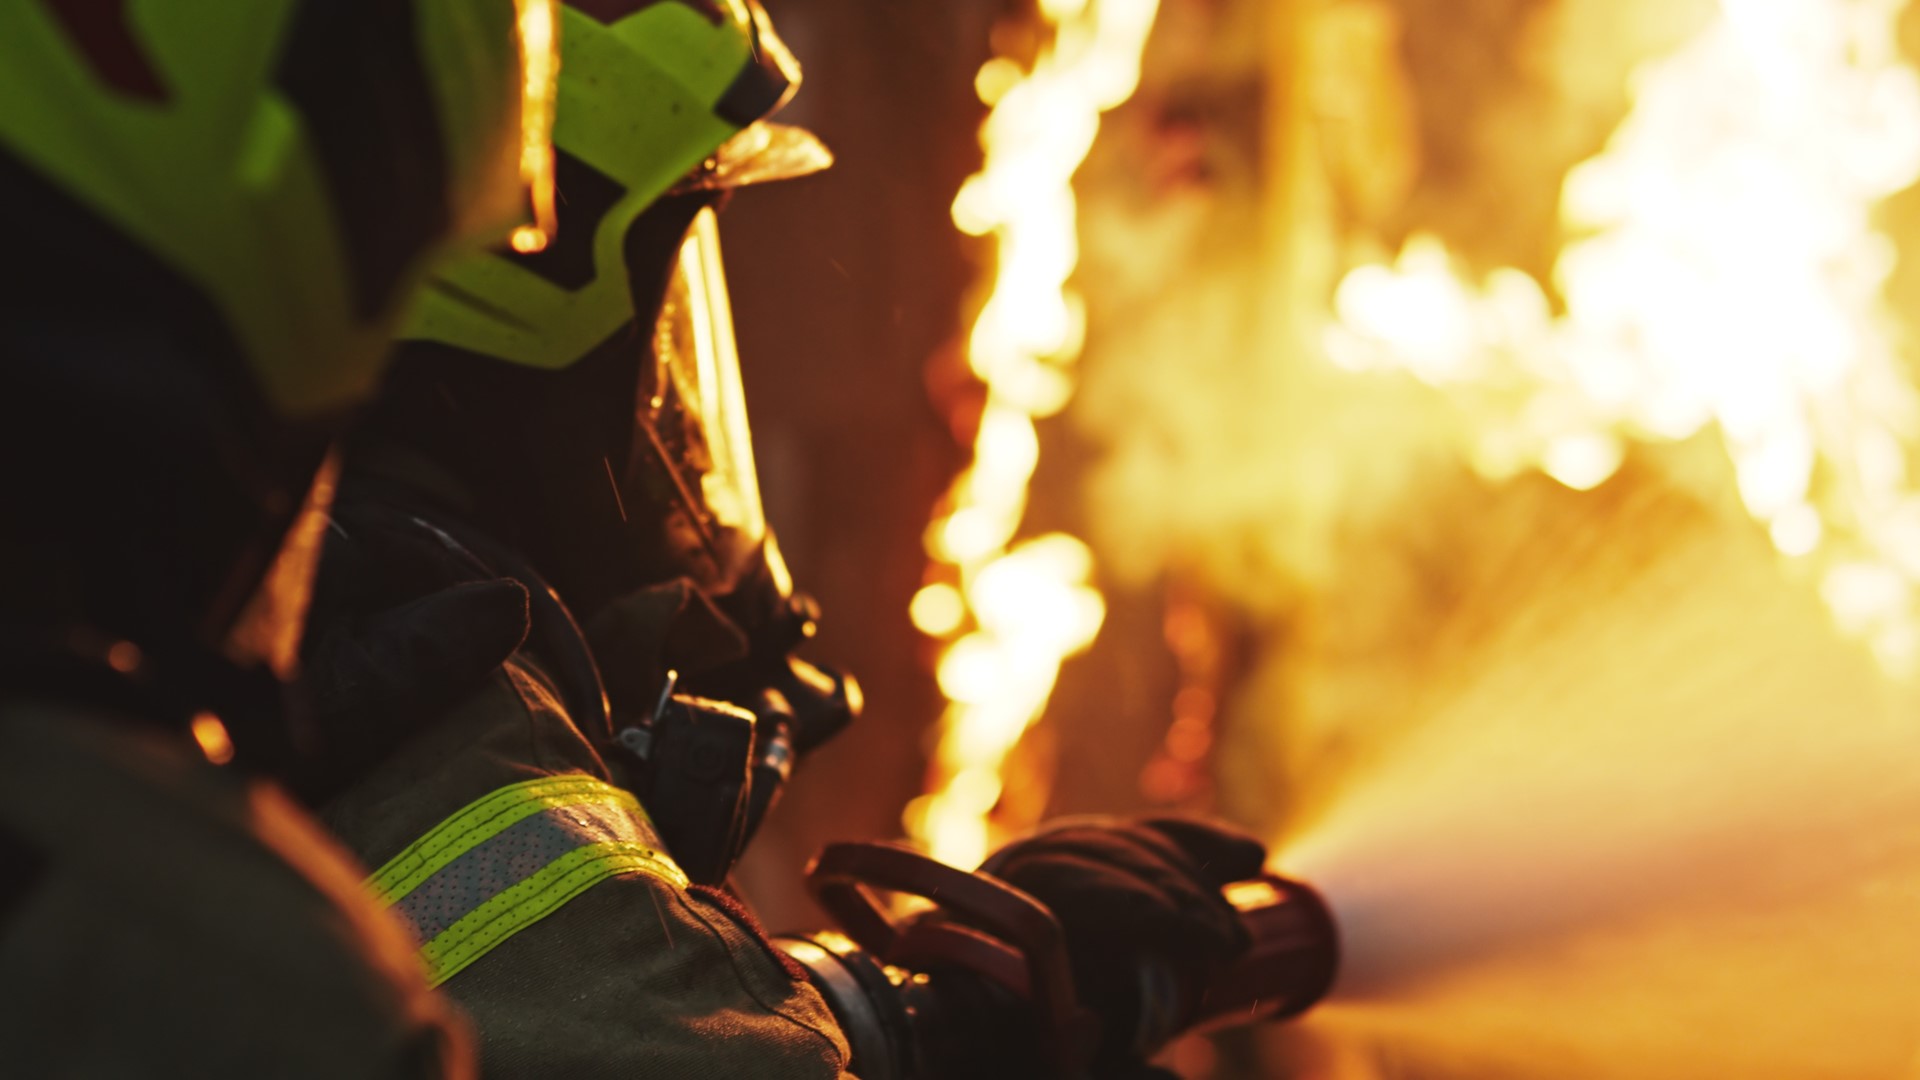 Fire Prevention Week aims to educate people about how to stay safe in the case of a fire.